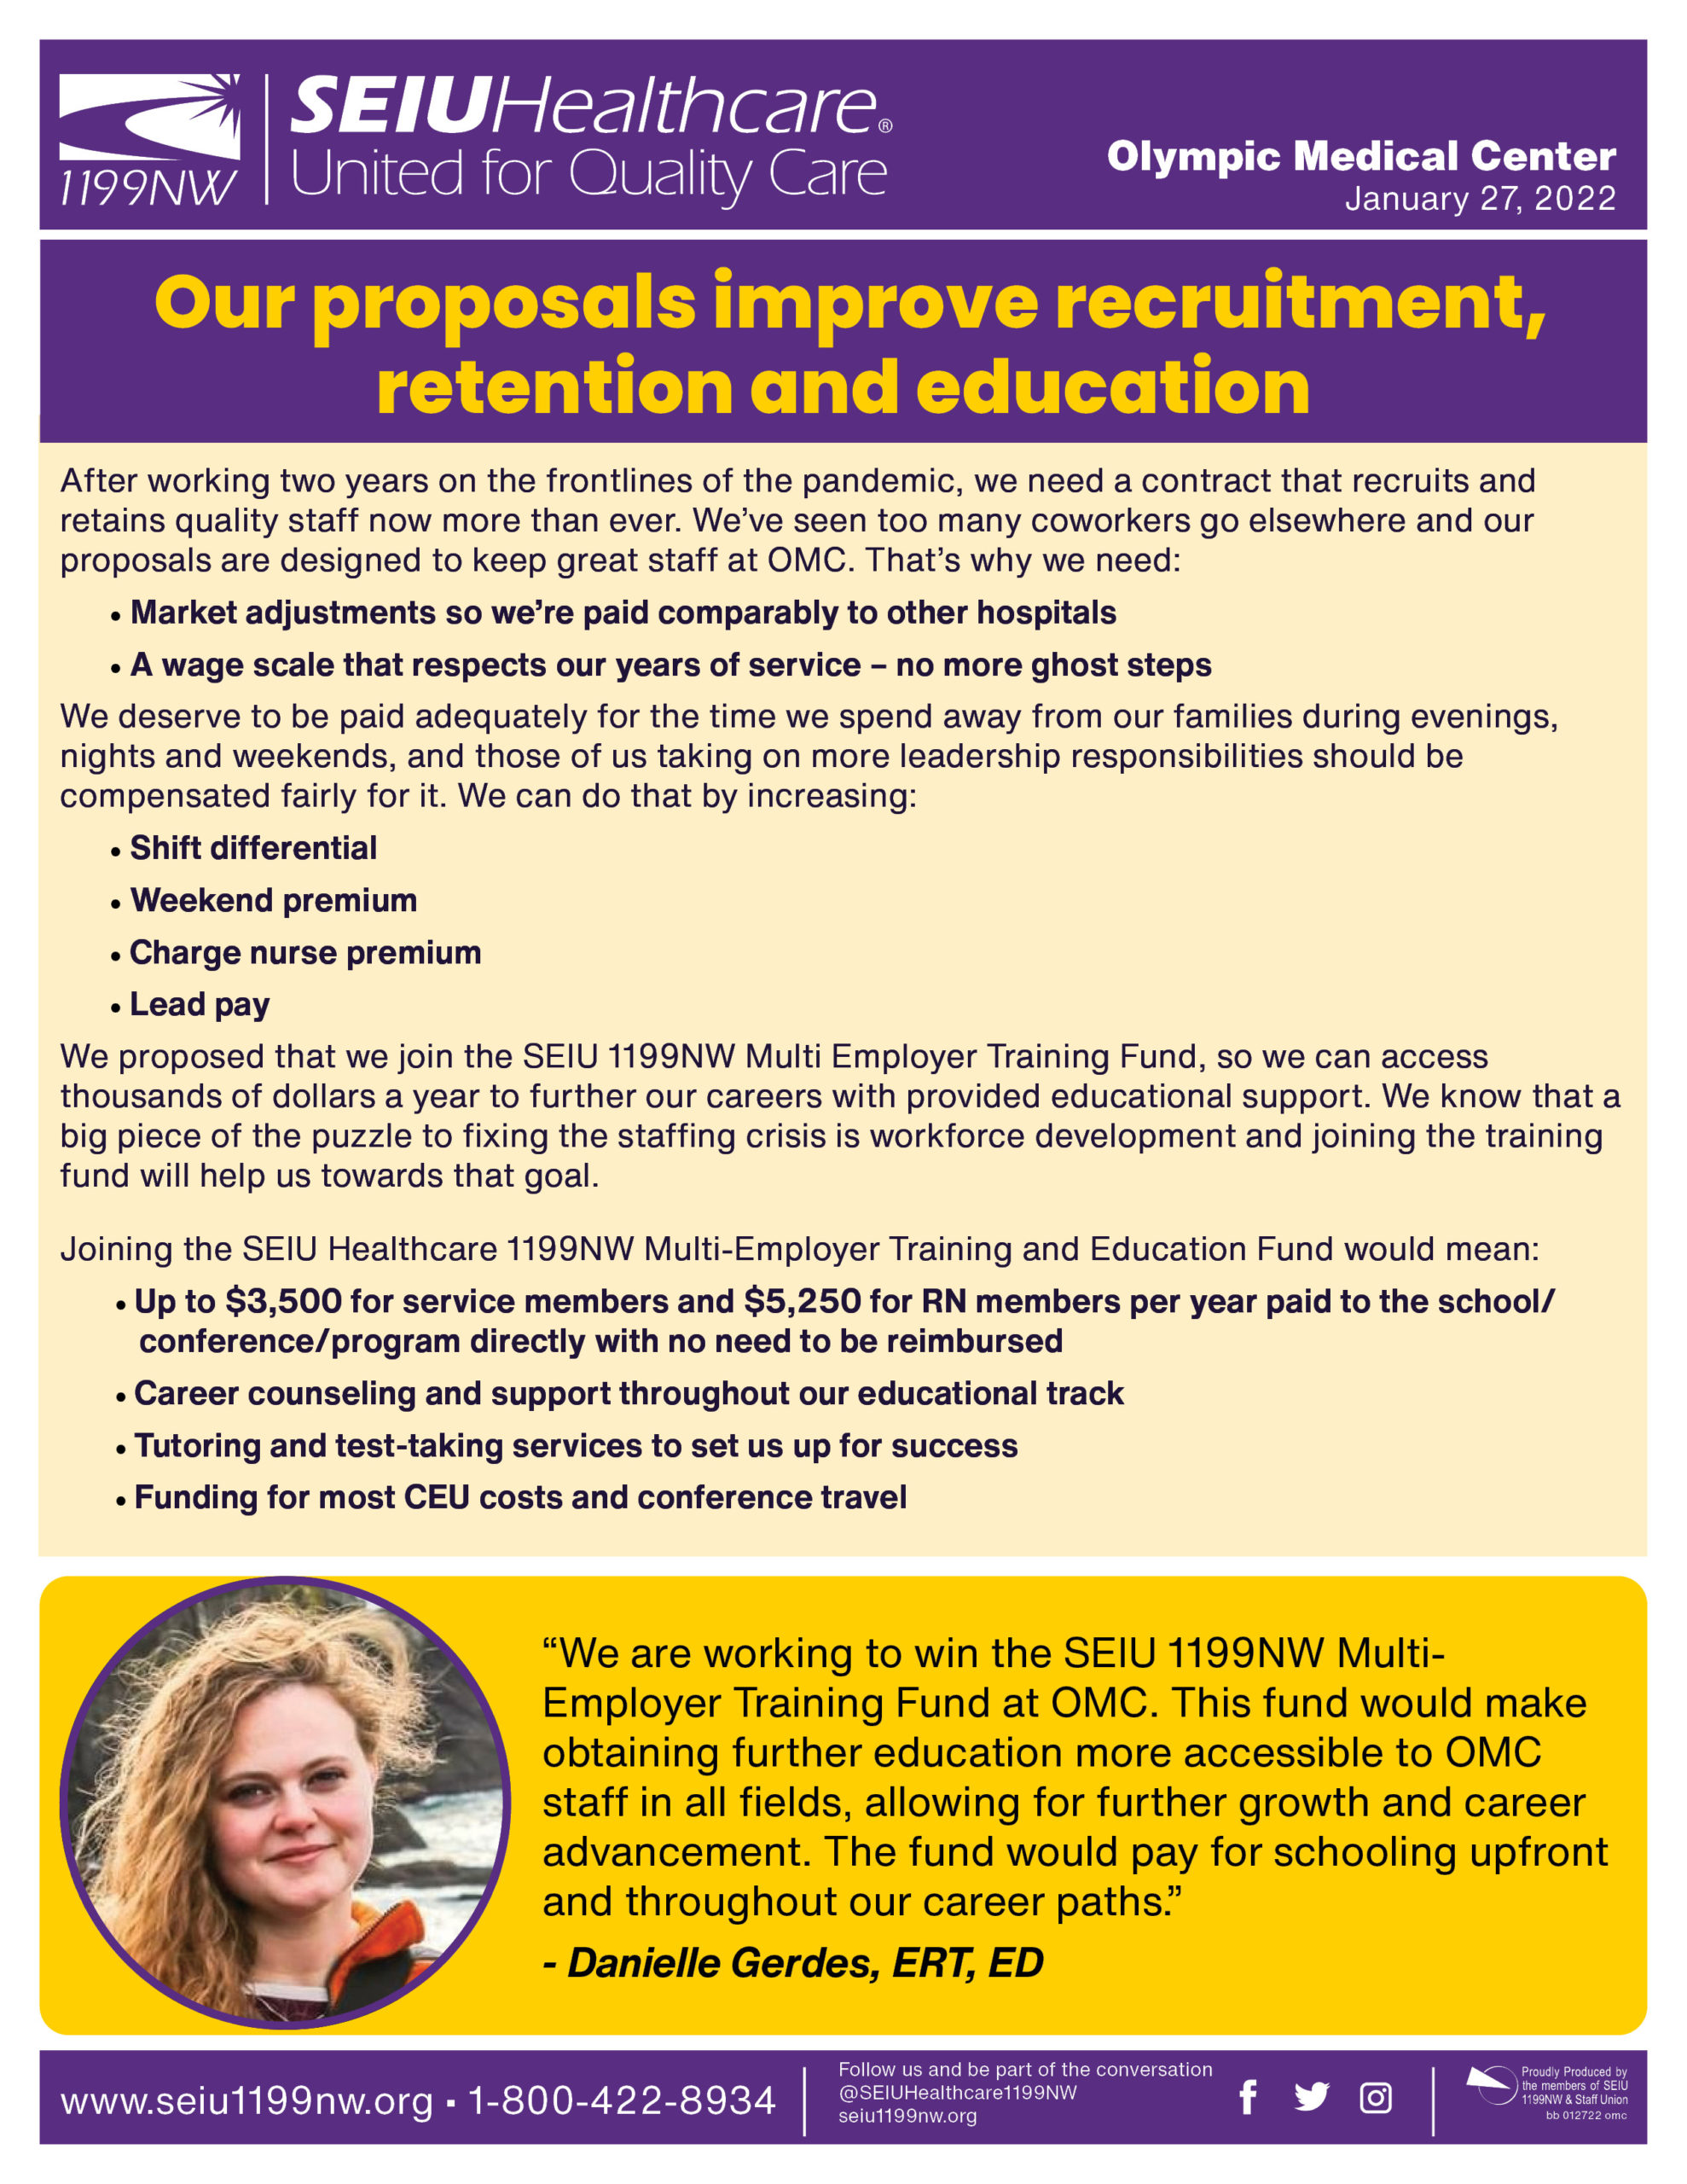 Our proposals improve recruitment, retention and education